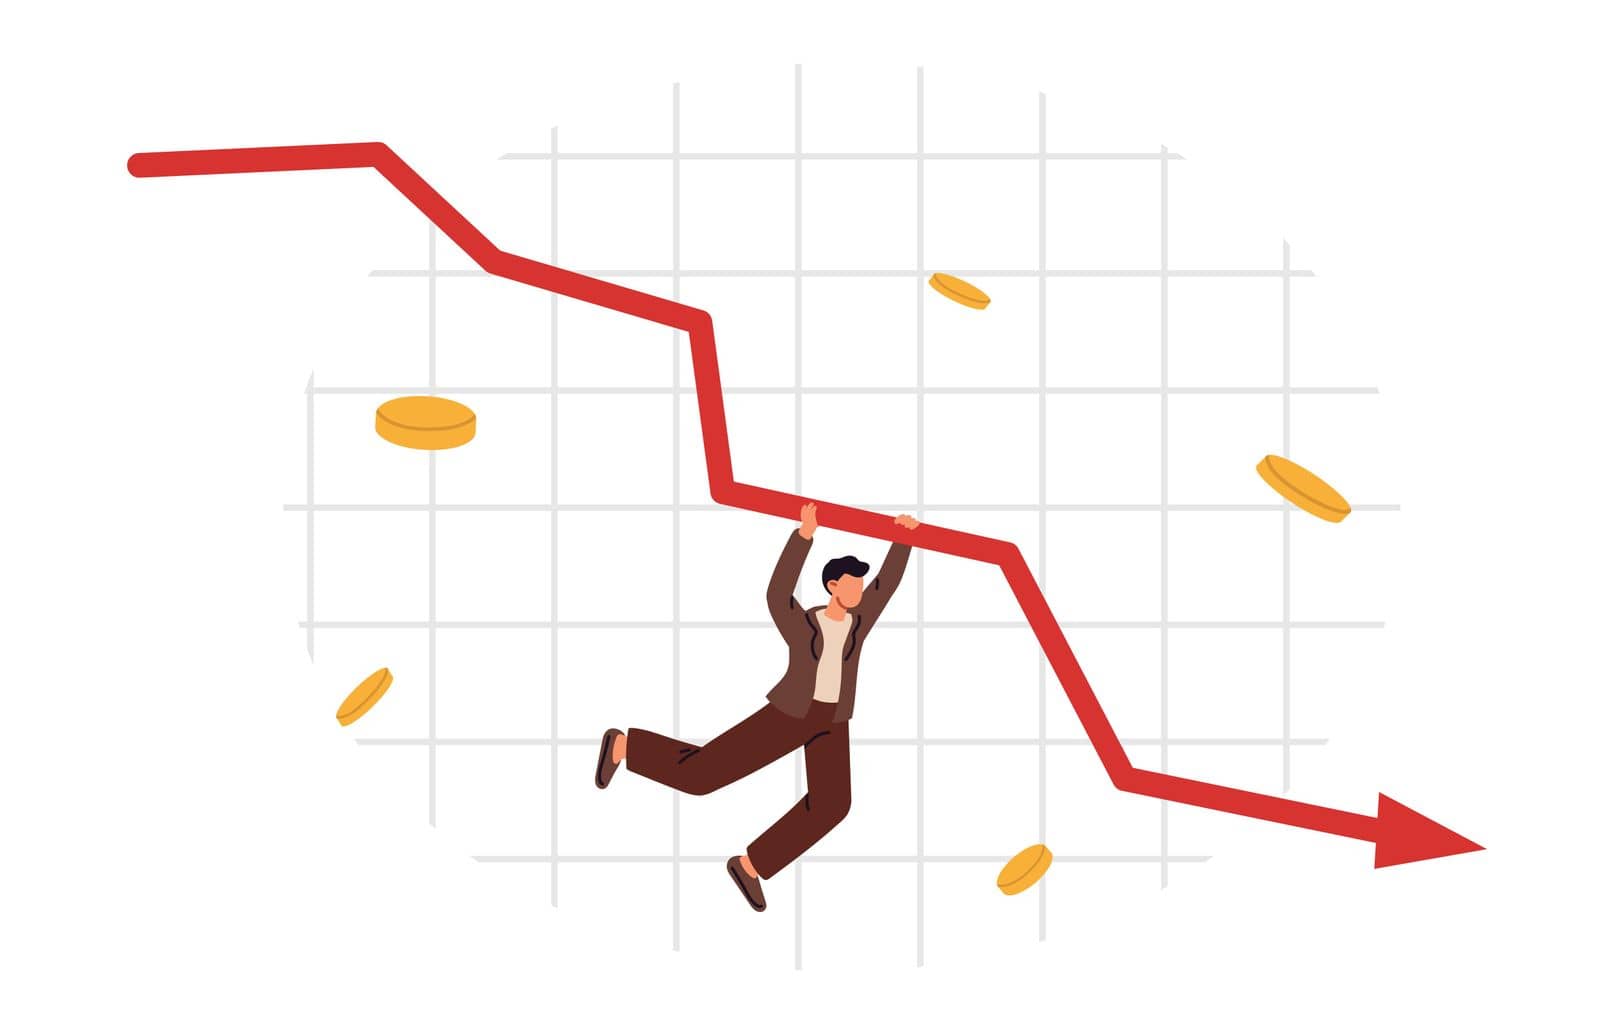 Global financial crisis, decline economy, bankruptcy. Arrow point downwards. Economic downturn. Flat vector illustration by vikalost